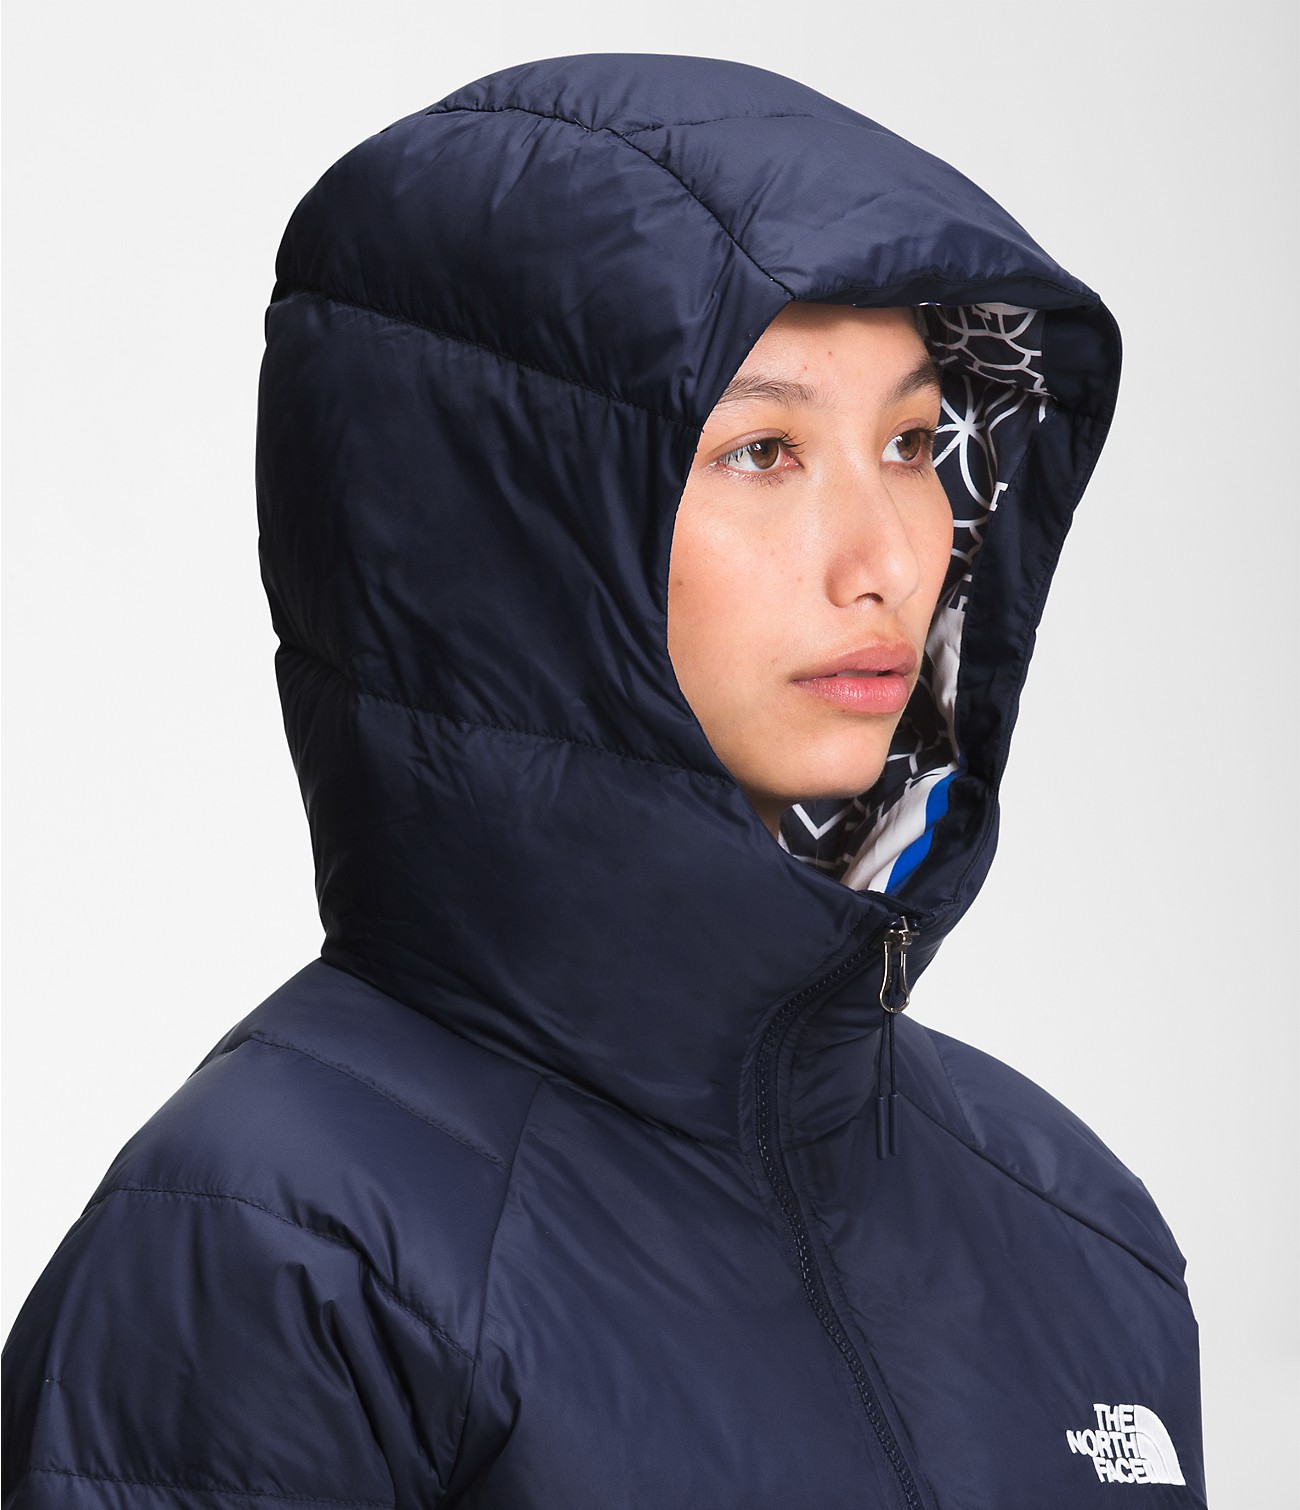 Women’s Printed Hydrenalite Down Hoodie | The North Face